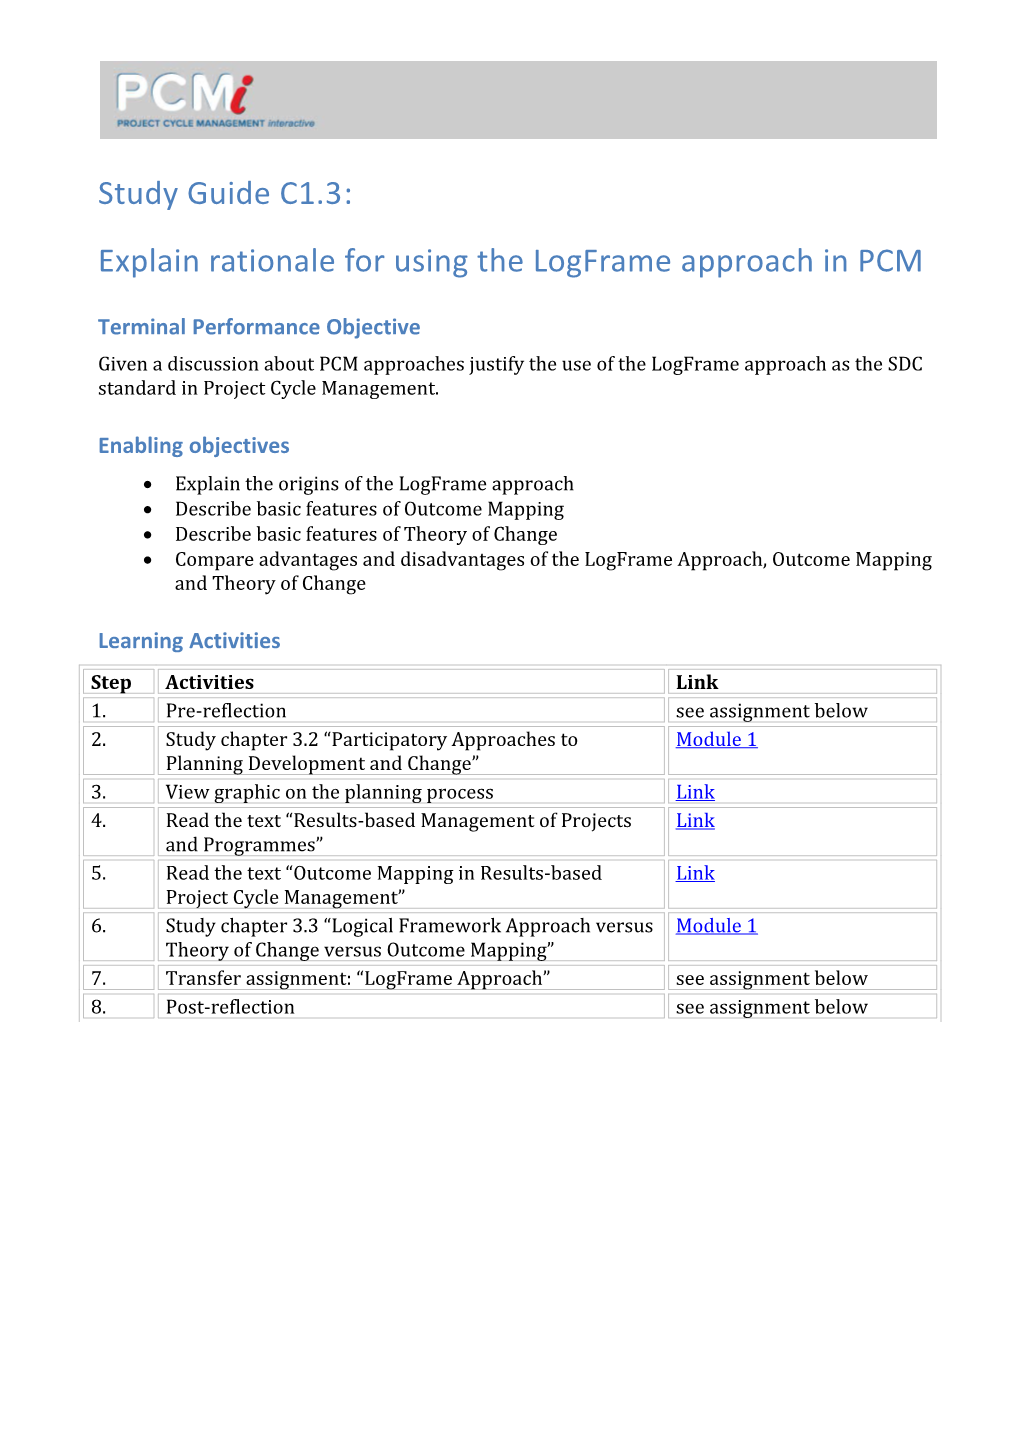 Explain Rationale for Using the Logframe Approach in PCM